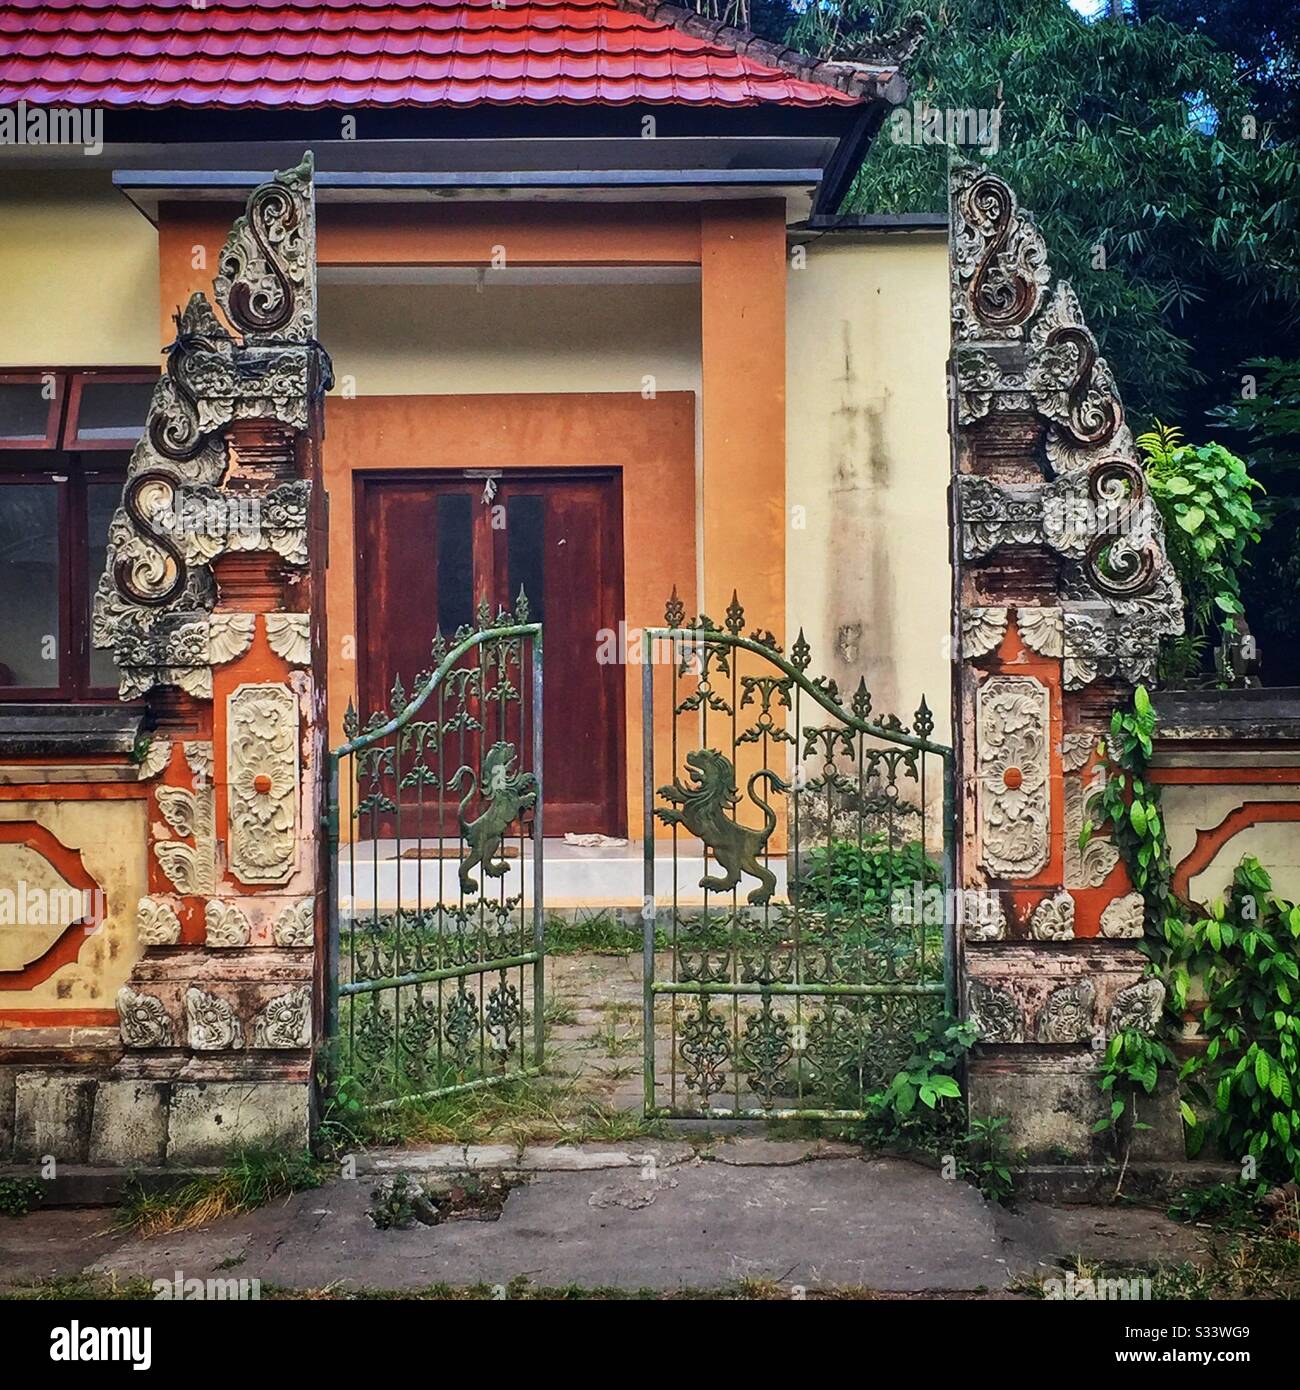 Entance to a modern Balinese house, consisting of a traditional candi bentar, or split gateway, and iron gates with lion motifs, Candidasa, Bali, Indonesia Stock Photo